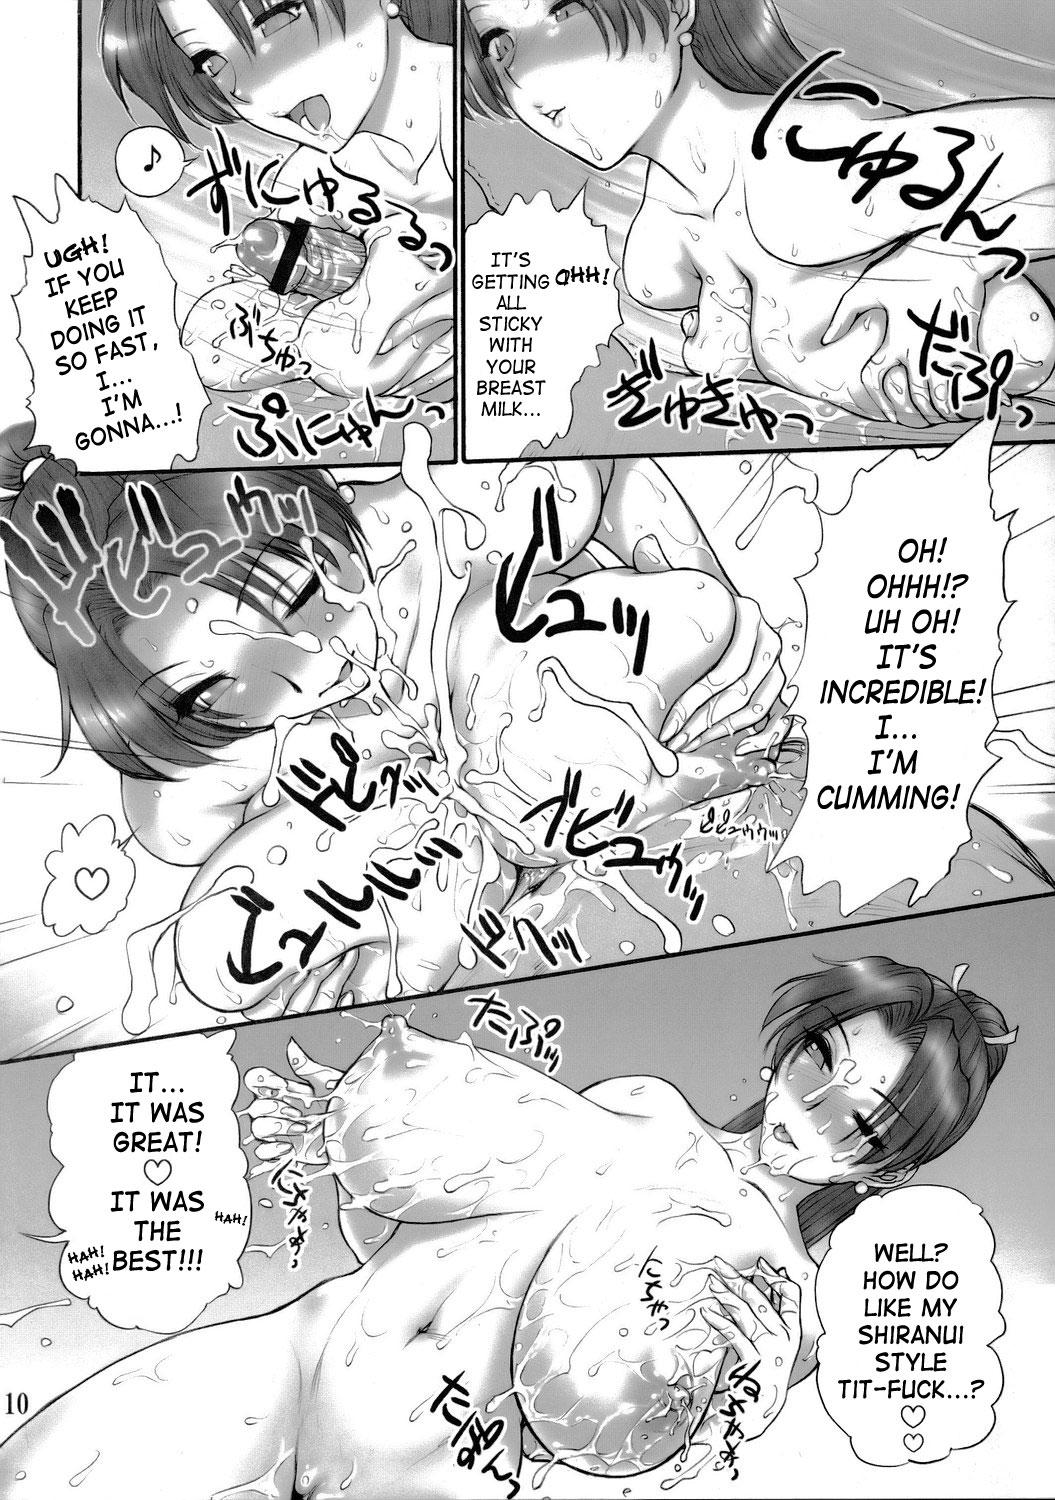 Cunnilingus (SC29) [Shinnihon Pepsitou (St. Germain-sal)] Report Concerning Kyoku-gen-ryuu (The King of Fighters) [English] [SaHa] - King of fighters Hymen - Page 11